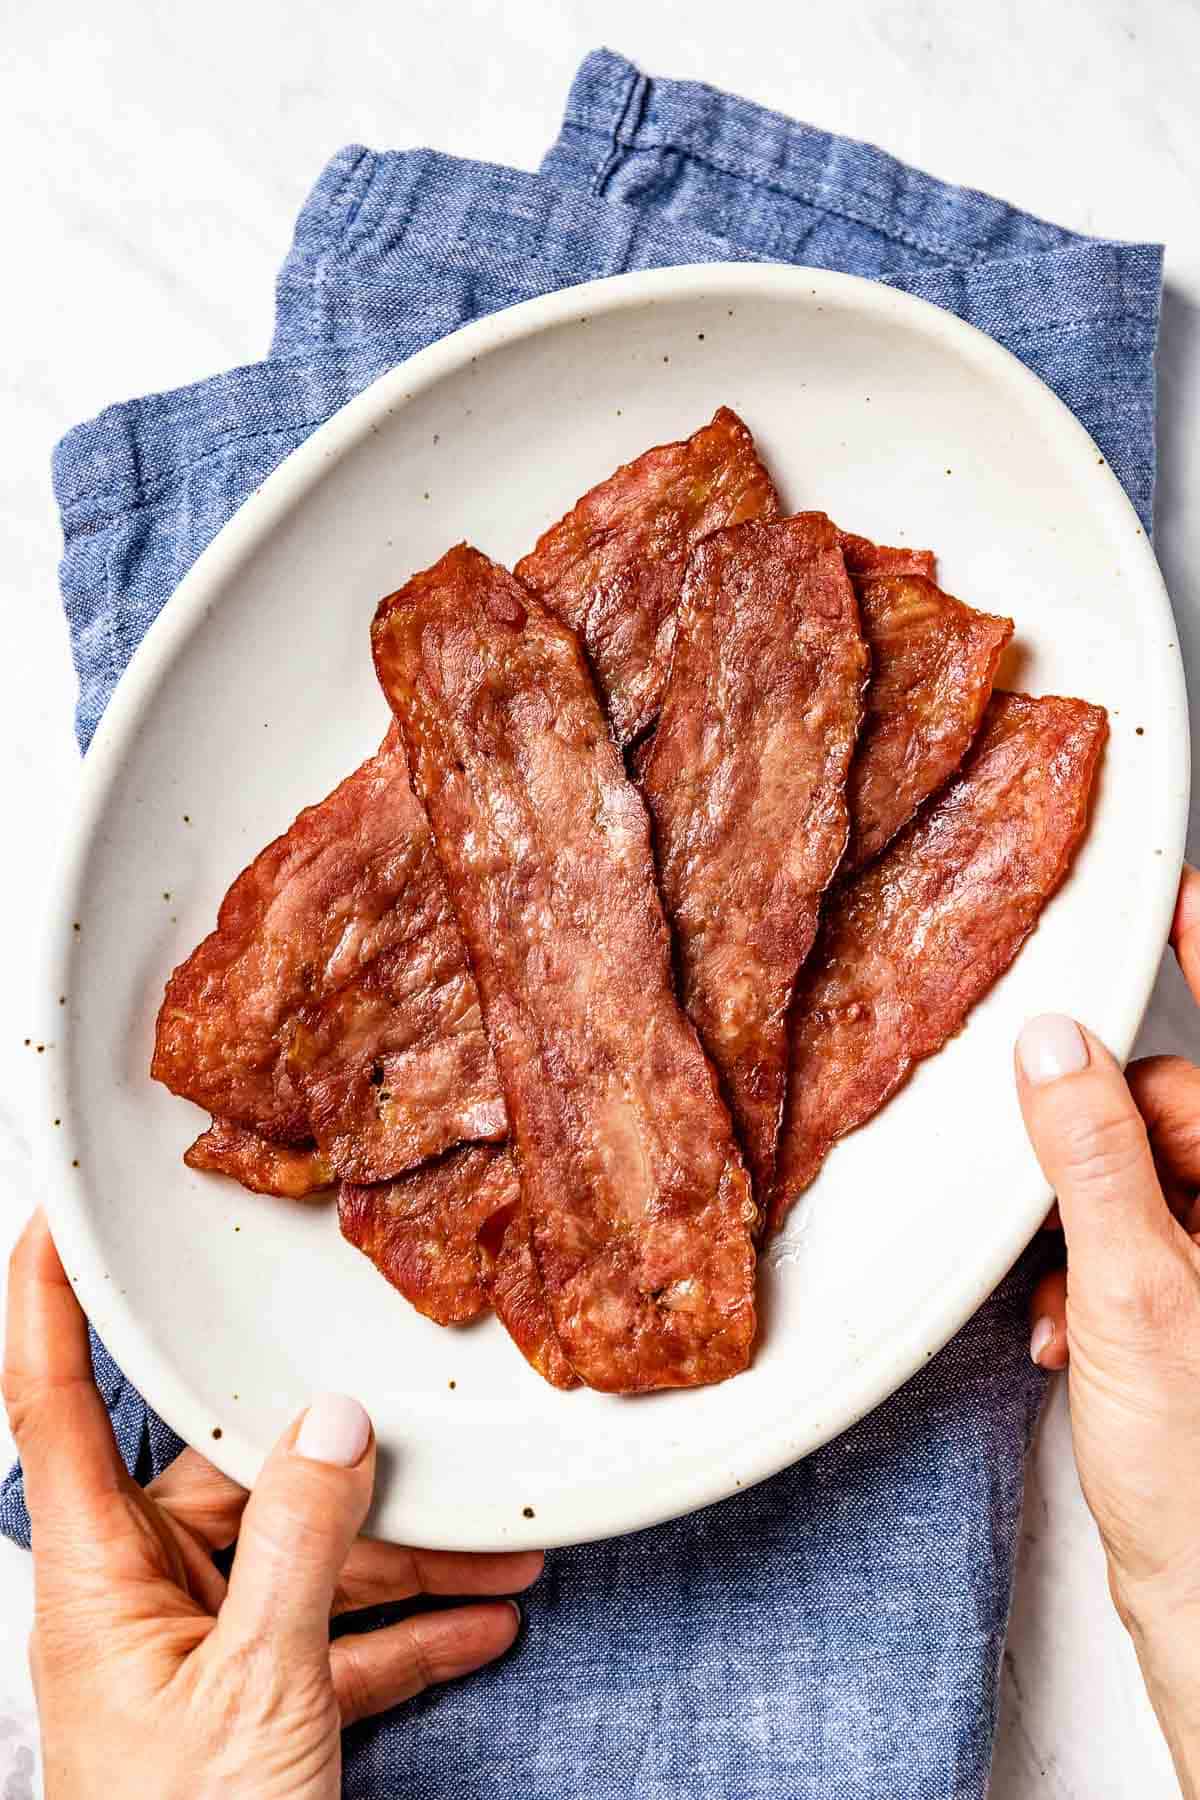 https://foolproofliving.com/wp-content/uploads/2022/02/How-to-cook-turkey-bacon-in-the-oven.jpg